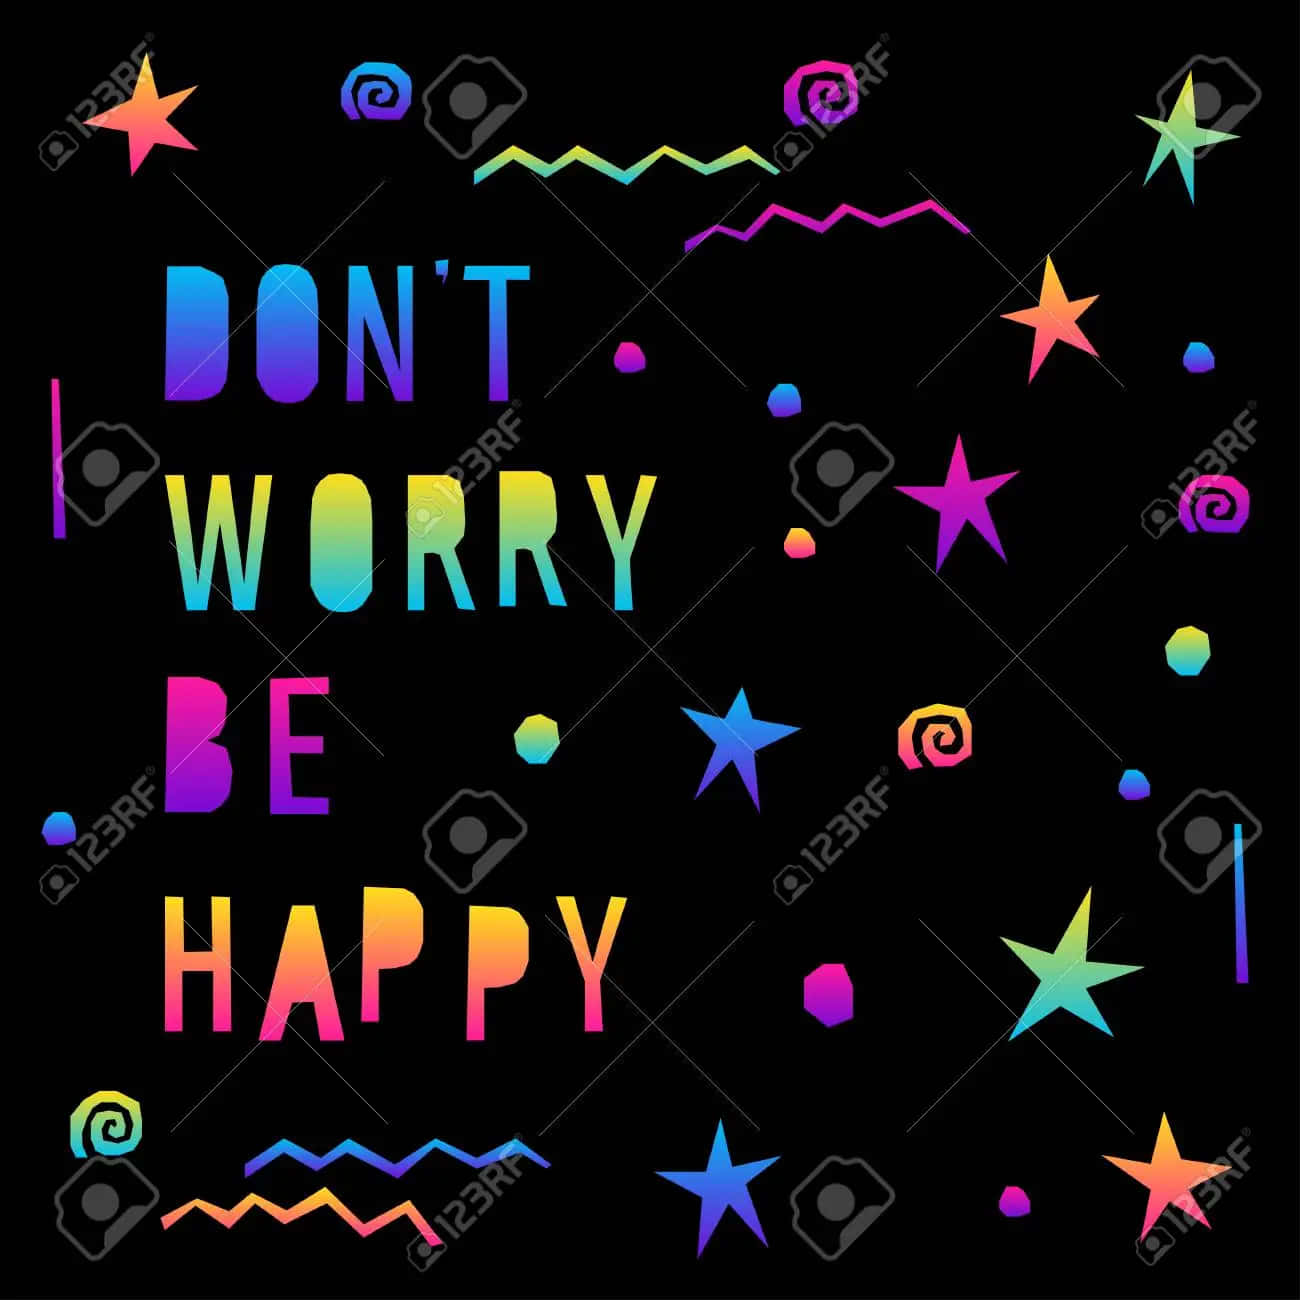 Don't Worry Be Happy Quote On Black Background With Colorful Stars Wallpaper